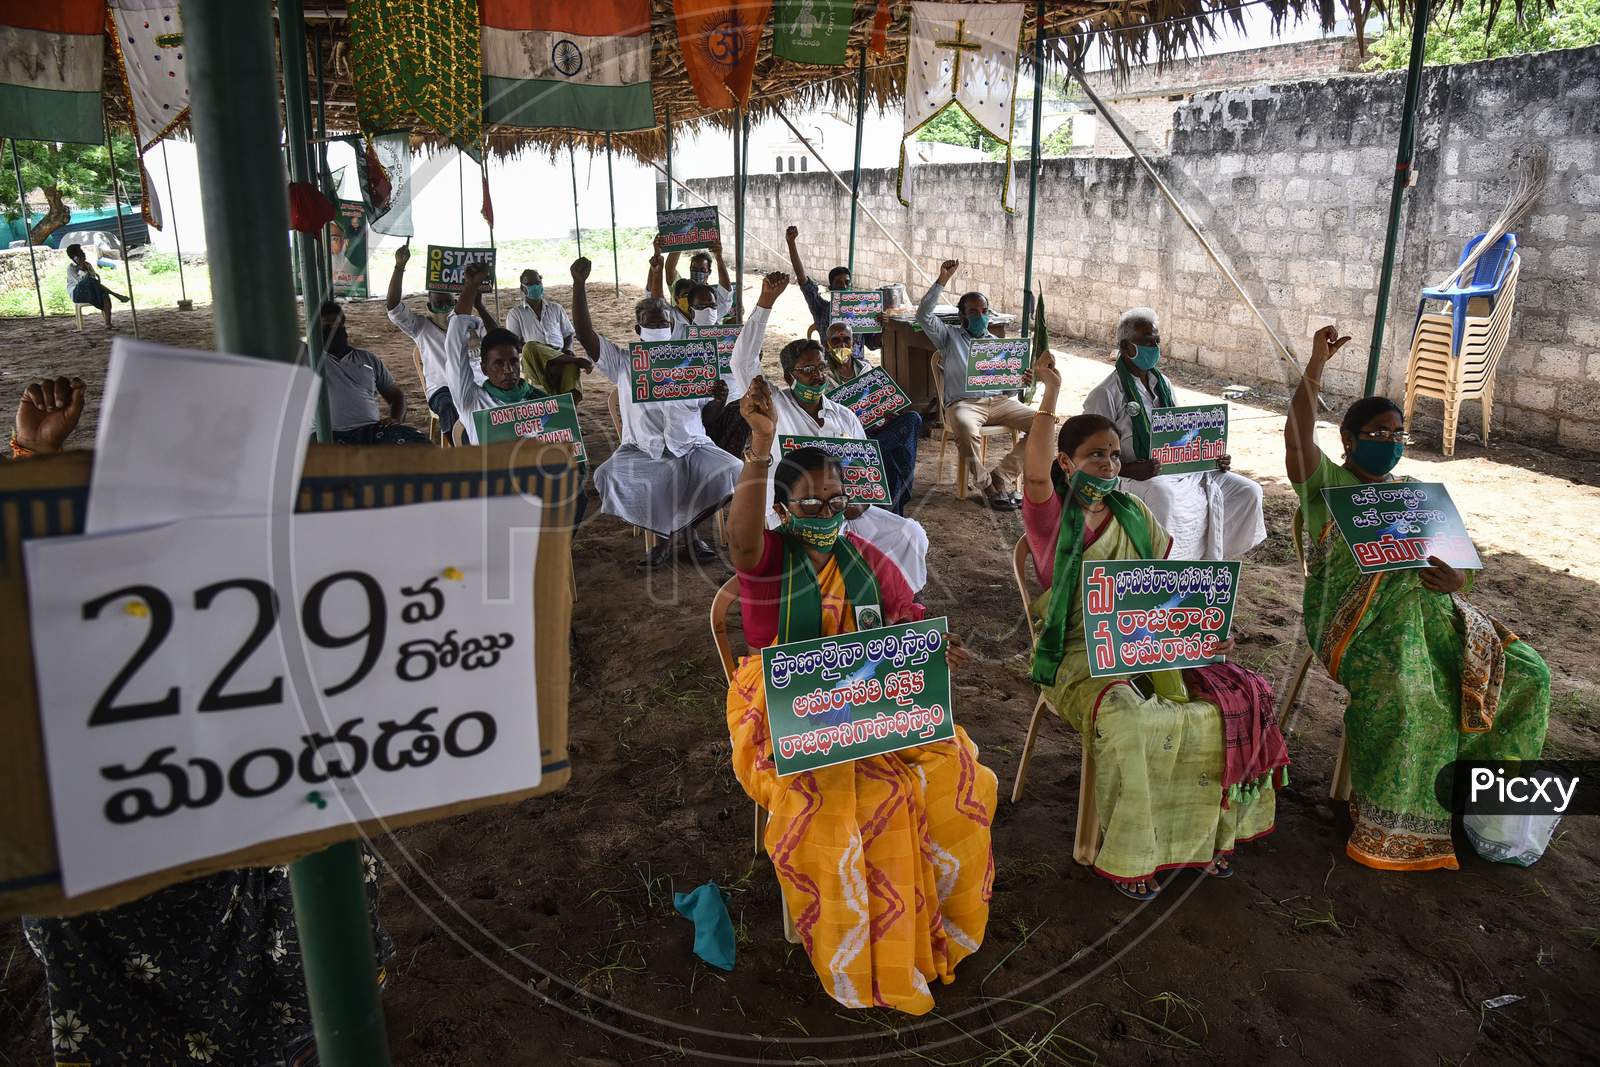 Farmers Hold Placards As They Protest Against Governor Biswabhusan Harichandan'S Approval For Three Capitals For The State Of Andhra Pradesh, At Mandadam In Guntur District, August 02, 2020.